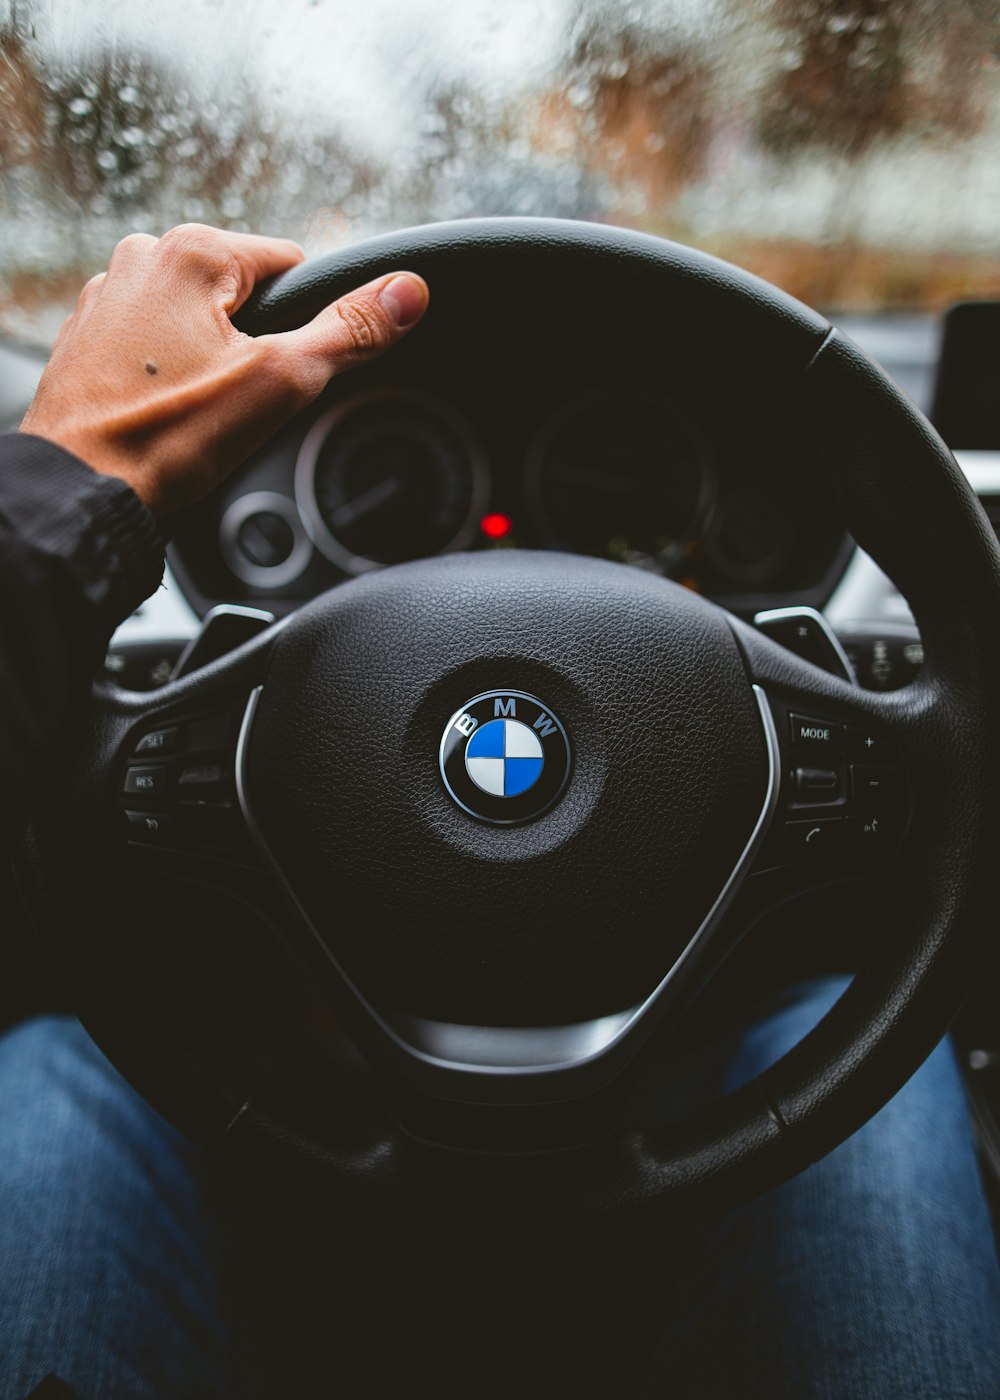 Steering Wheel Cover: How To Buy The Best One For Your Vehicle?